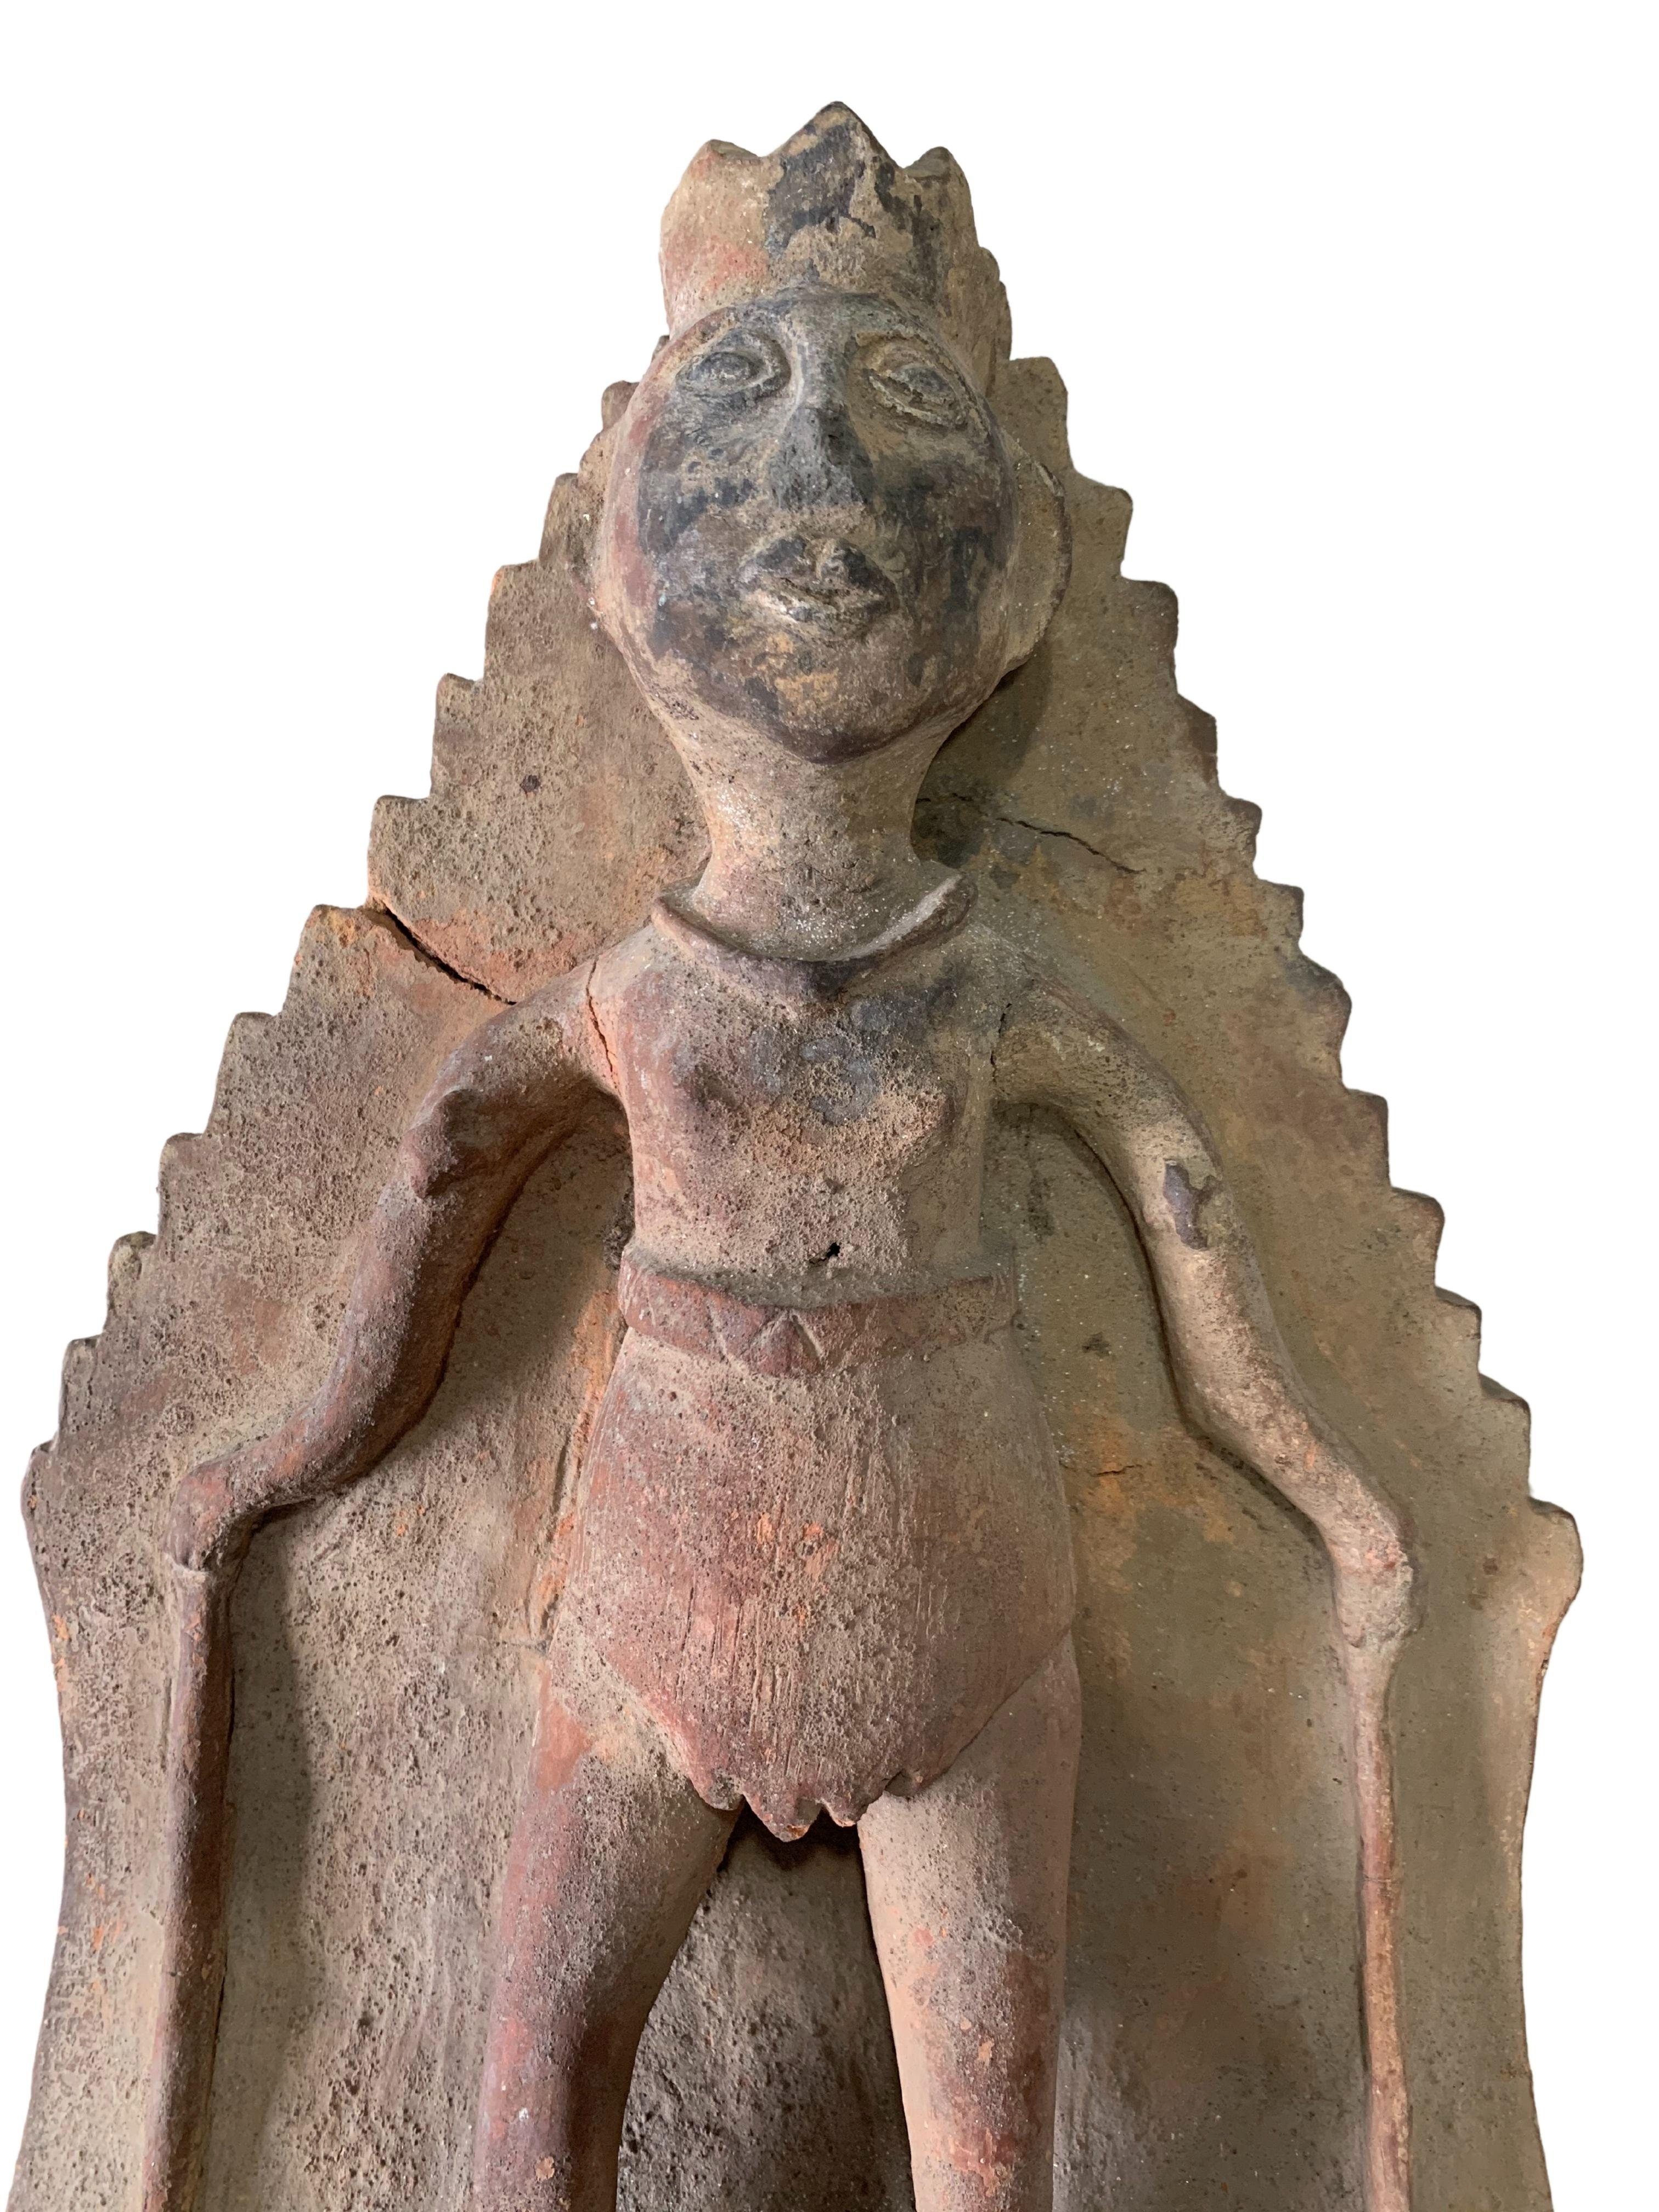 A Balinese terracotta panel that once adorned a Hindu temple. The panel depicts a male figure semi-robbed with a sarong (a garment consisting of a long piece of cloth worn around the body). The panel's figure features defined facial features and a